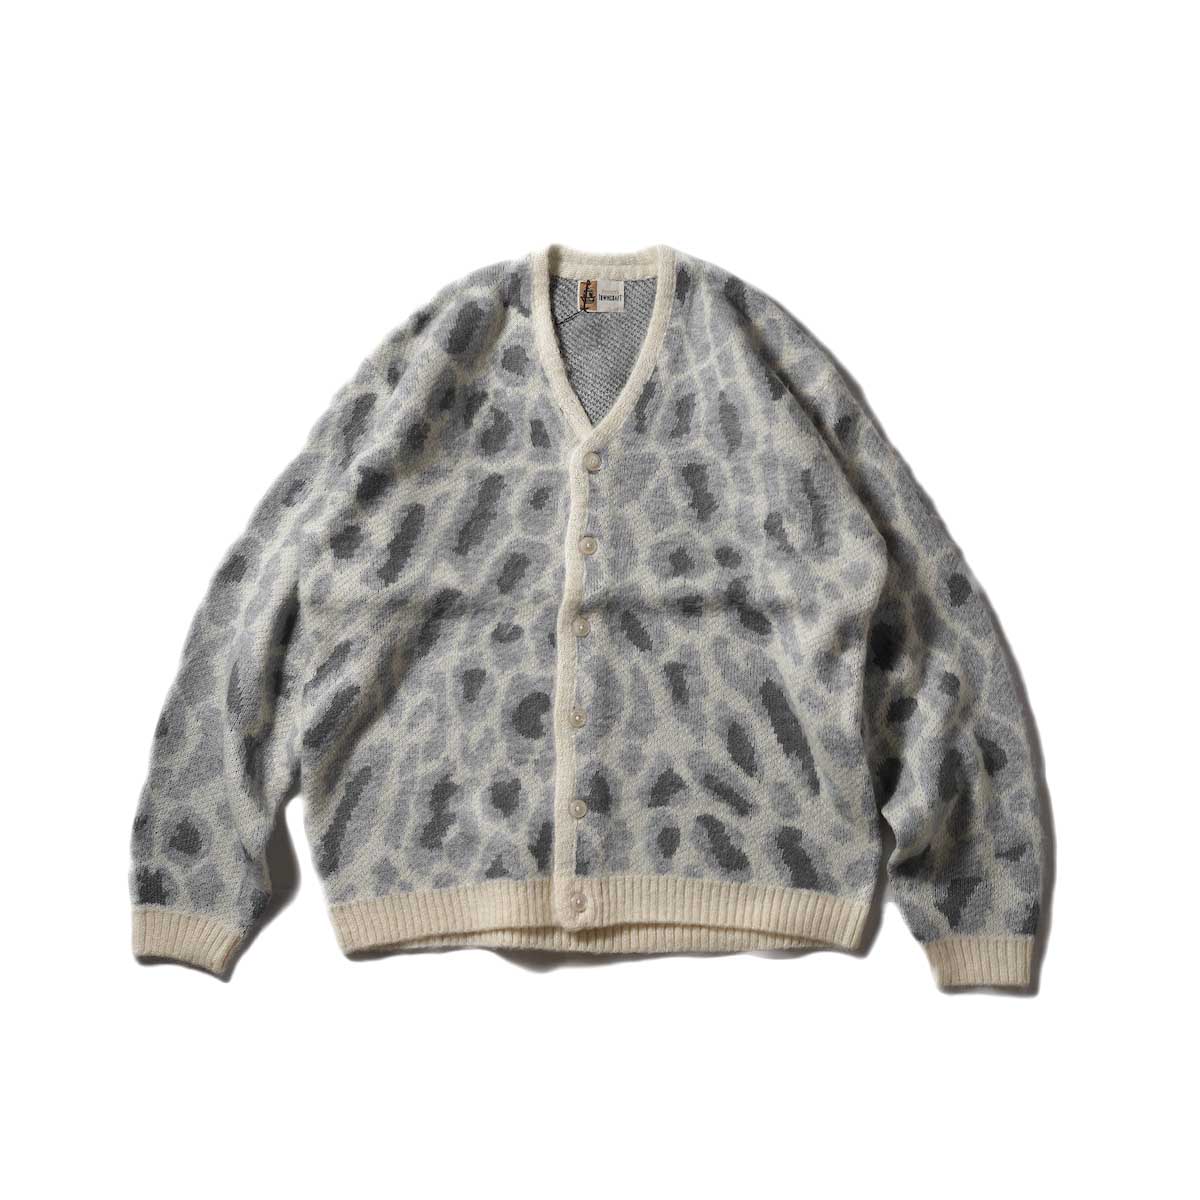 TOWNCRAFT / SHAGGY JACQUARD CARDIGAN (Leopard White)